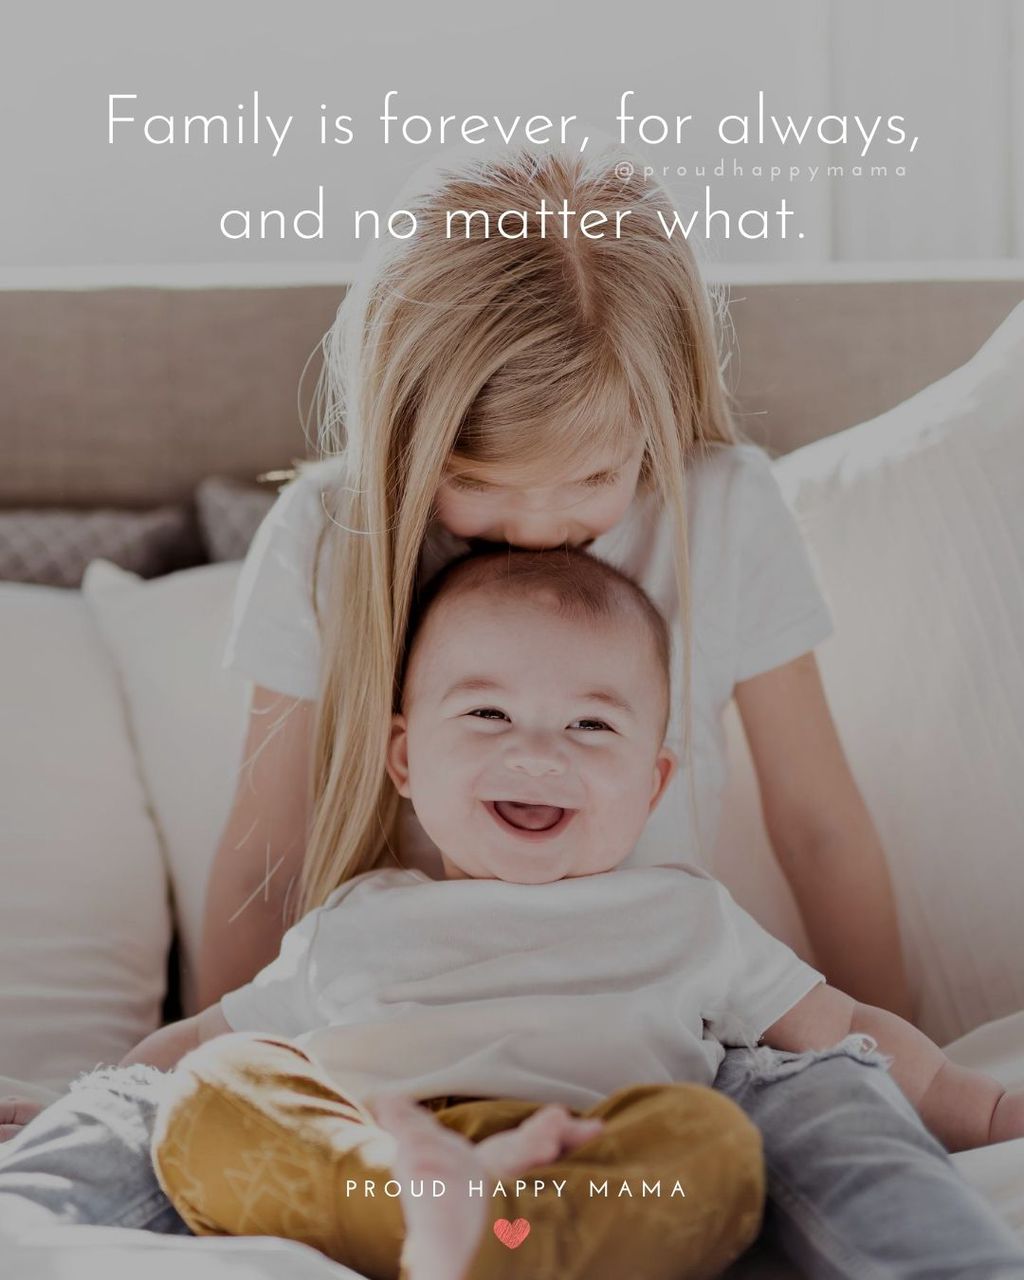 Love For Family Quotes | Family is forever, for always, and no matter what.